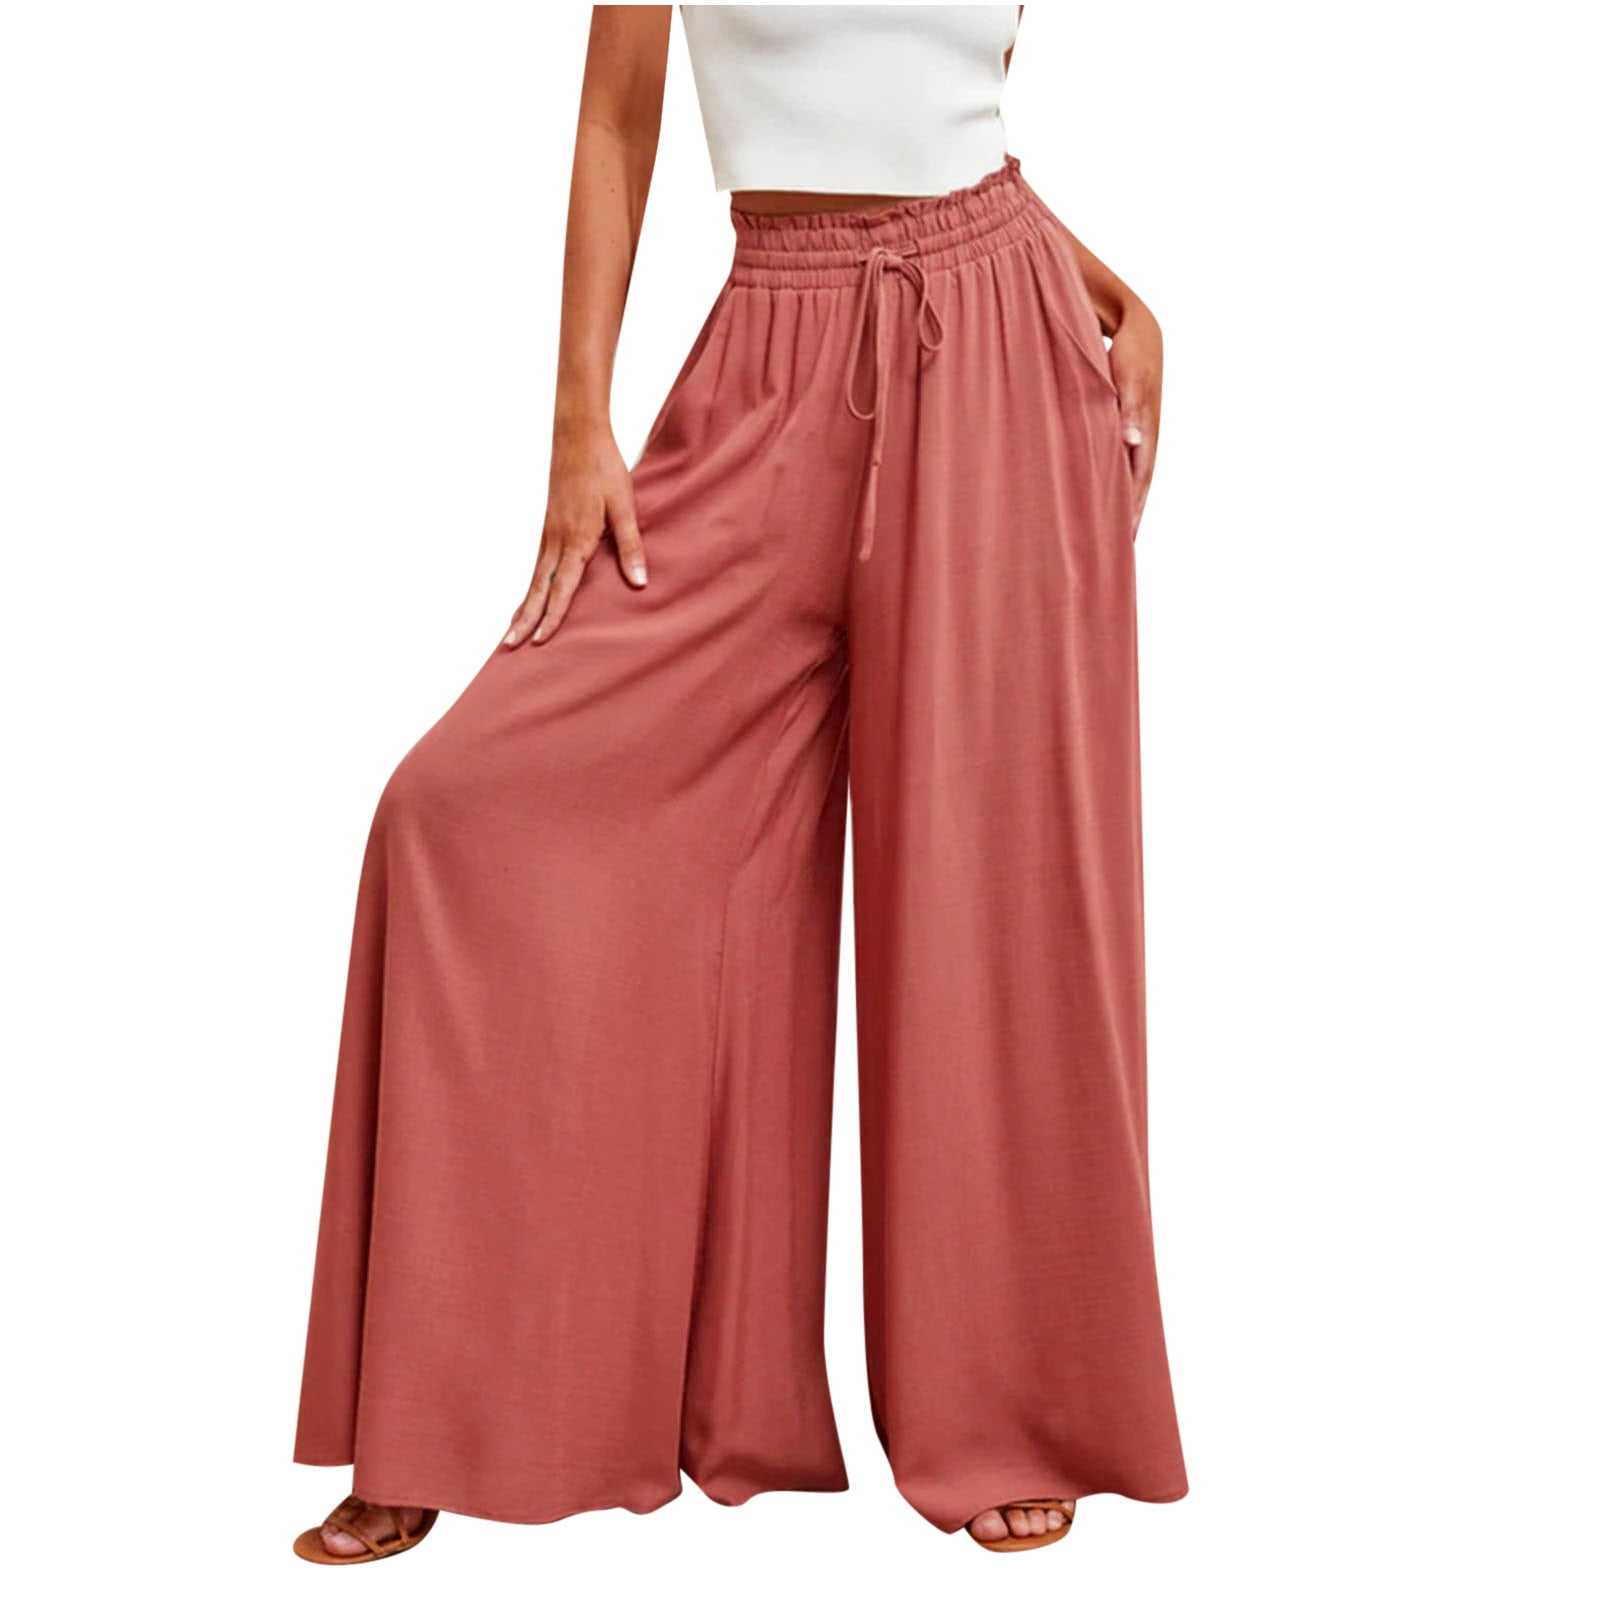 Dadaria Wide Leg Pants for Women Petite Length Solid Button with Pocket  Elastic Waist Long Pants Red S,Female